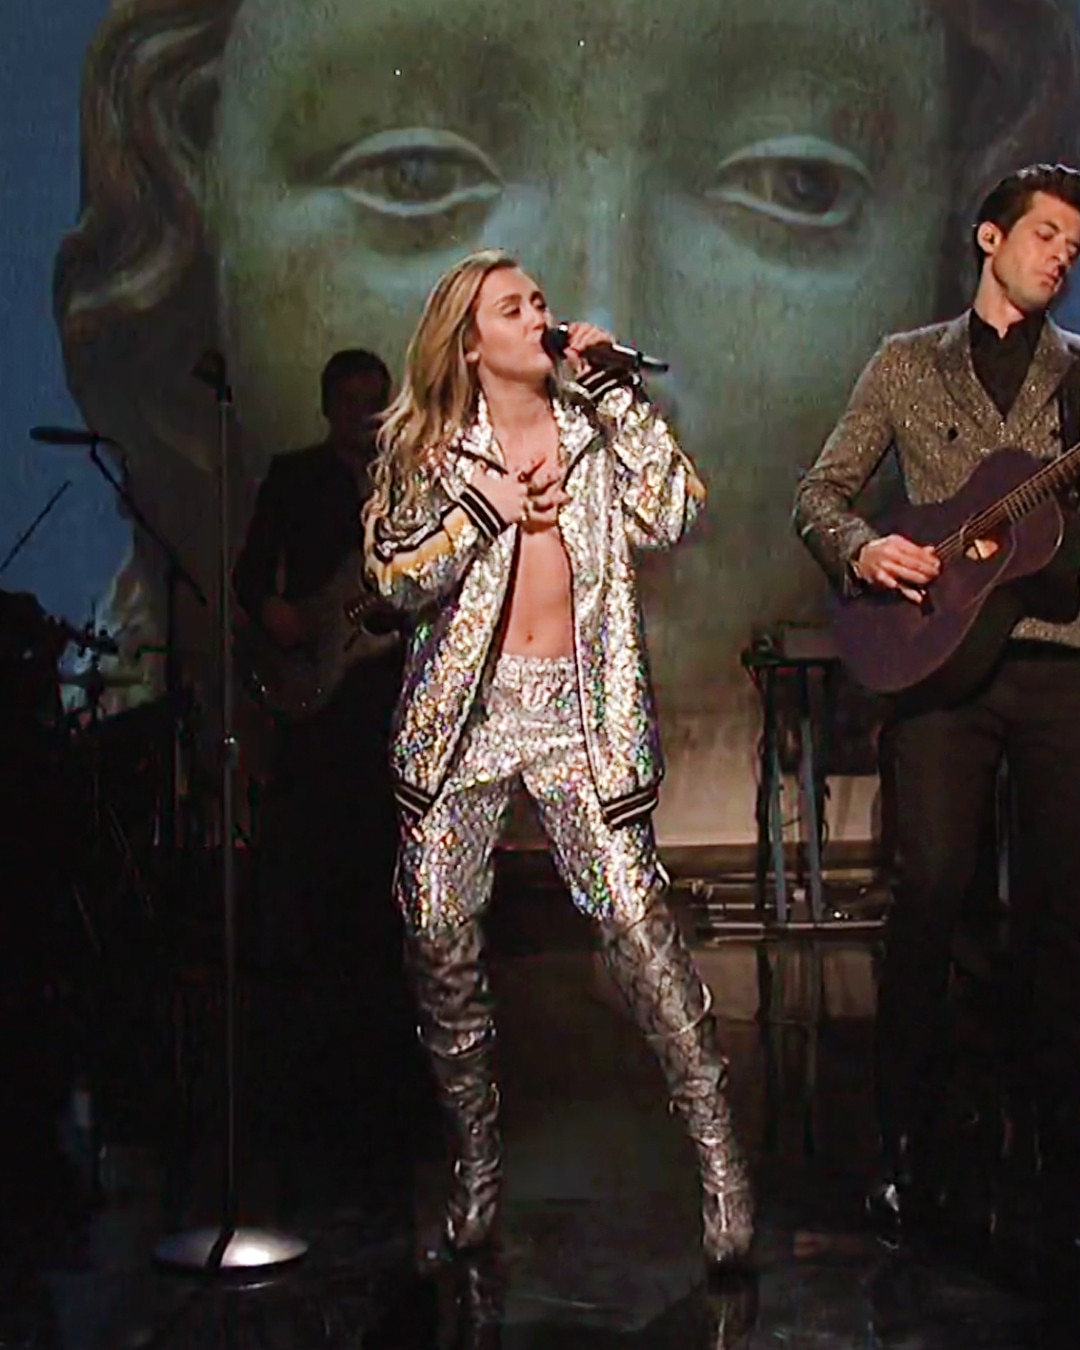 miley cyrus saturday night live outfit